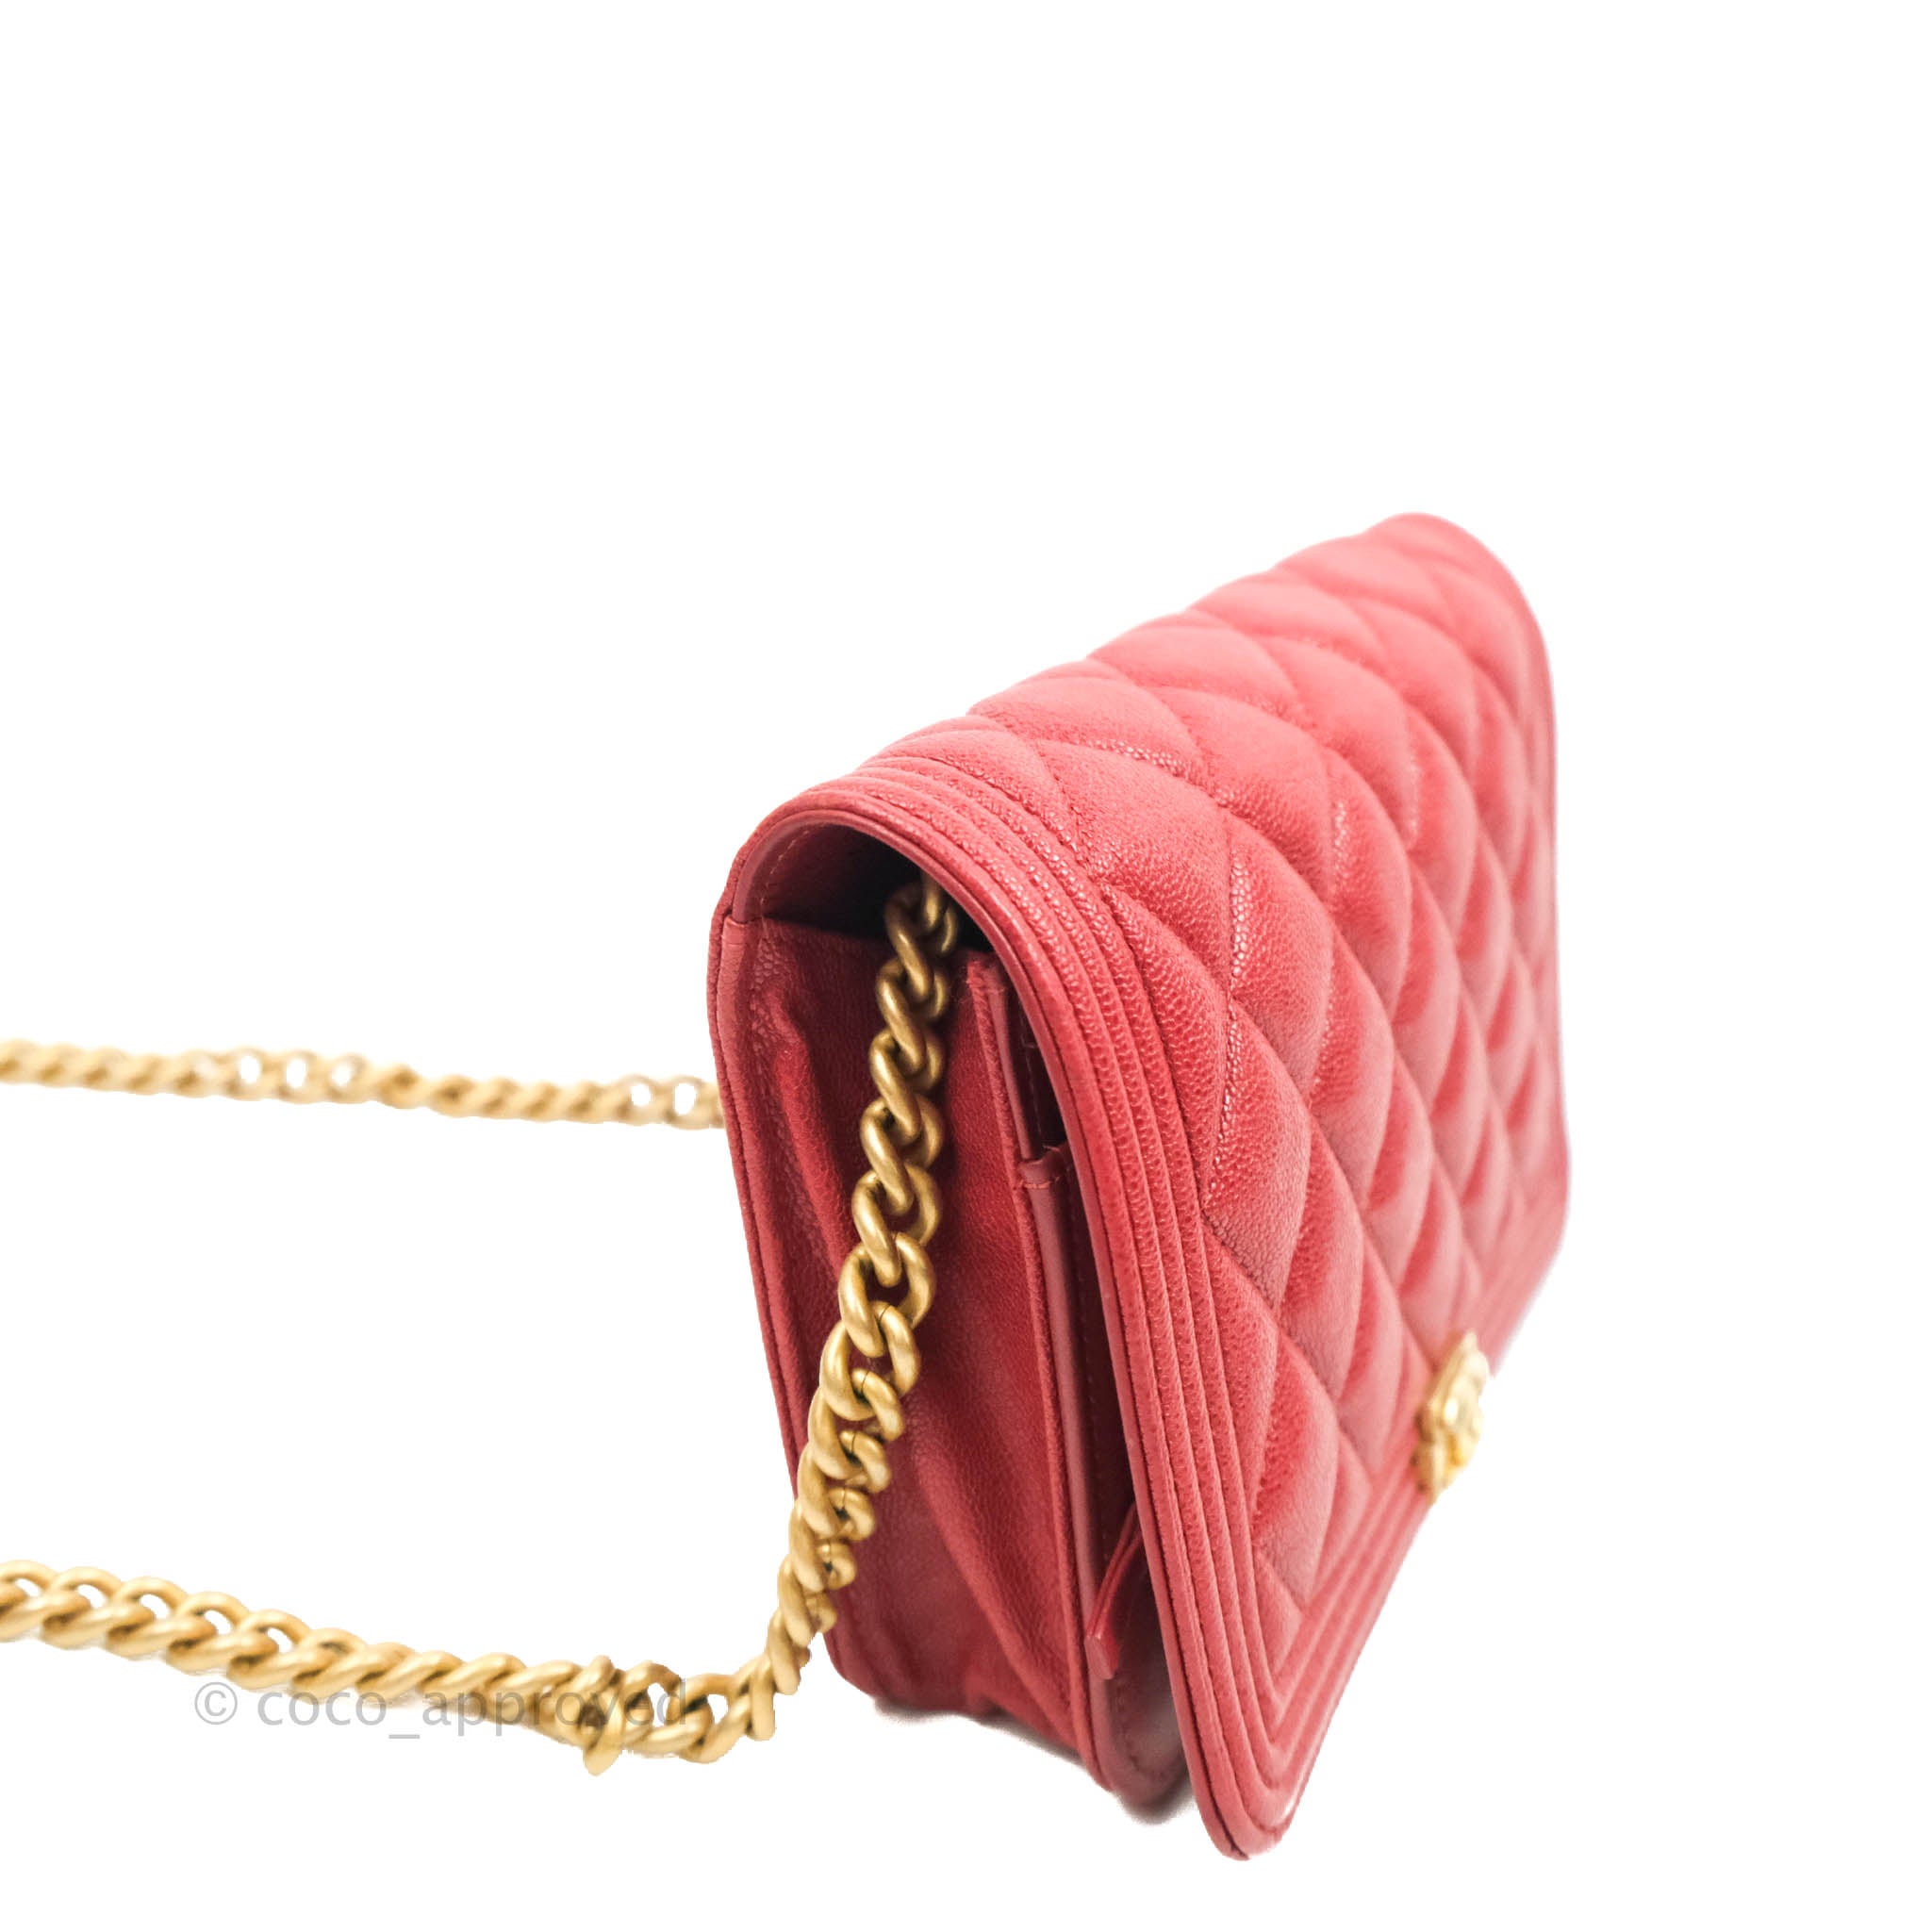 Chanel Quilted Boy Wallet on Chain WOC Red Caviar Aged Gold Hardware – Coco  Approved Studio